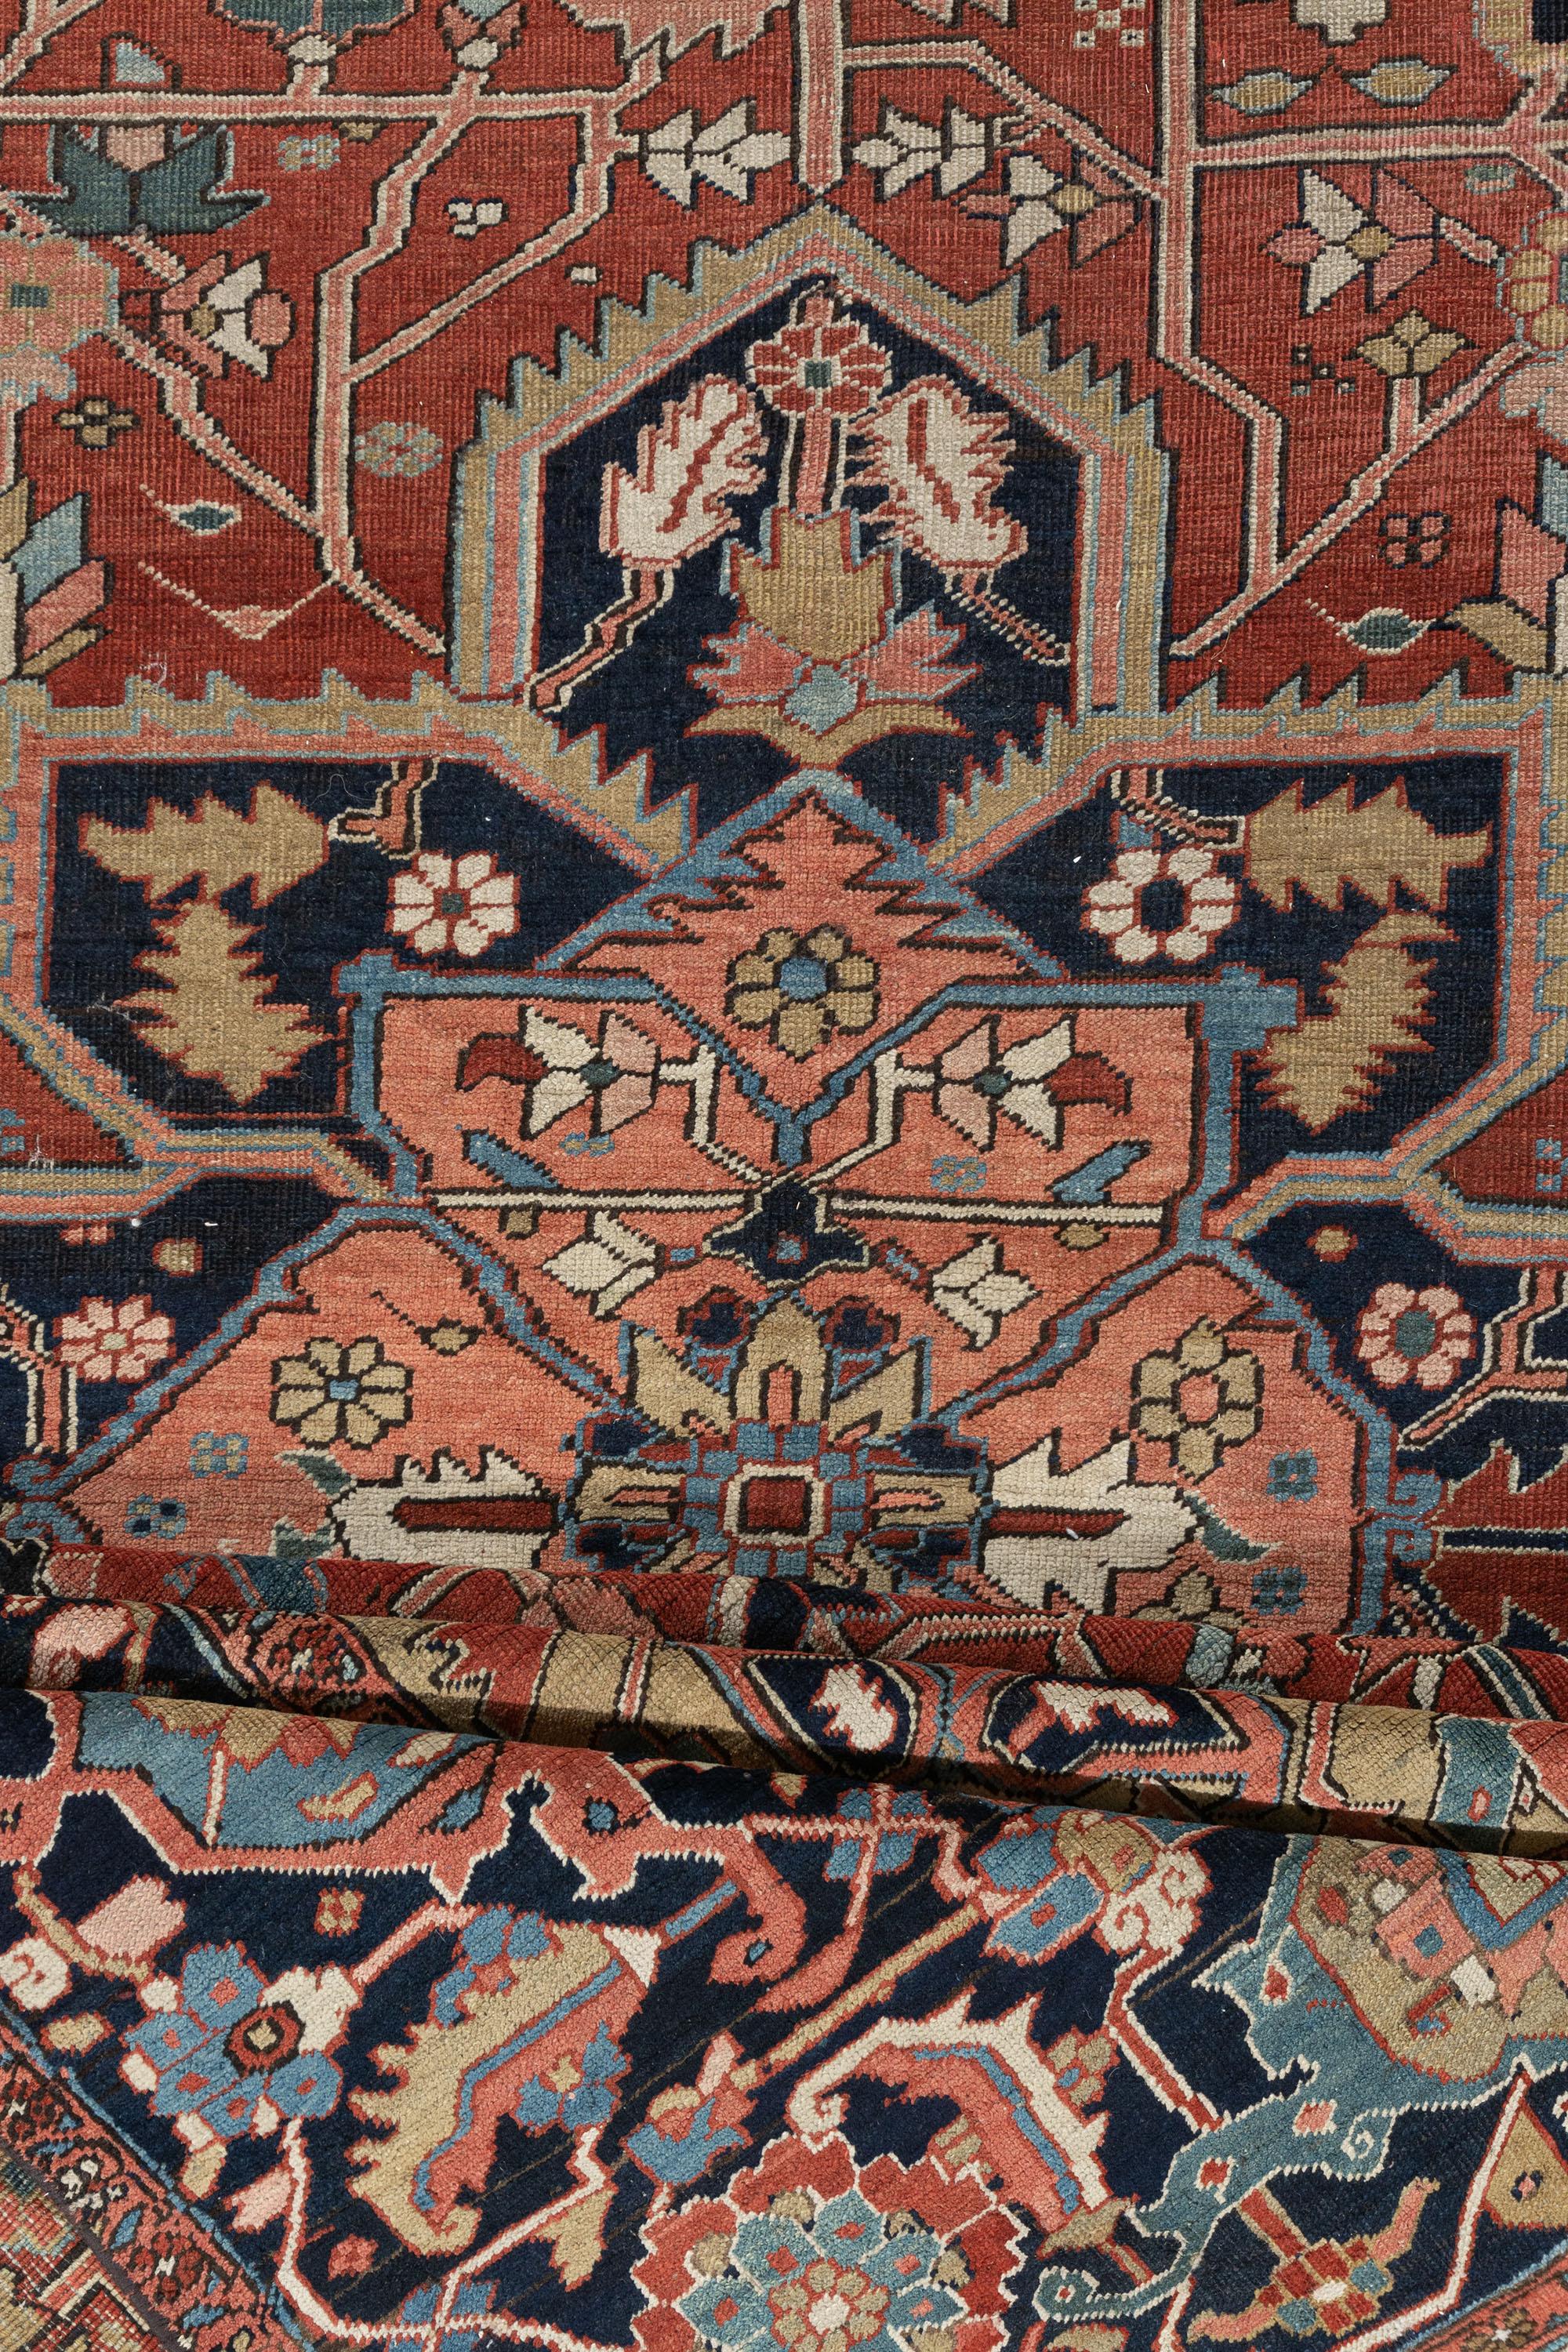 Vintage Persian Heriz Serapi rug 11'4 x 18'5. As perpetually fashionable as they are collectible, traditional Heriz luxury handmade rugs are skillfully woven in vibrant colors and emphatic geometric designs. Serapi carpets are a quality designation